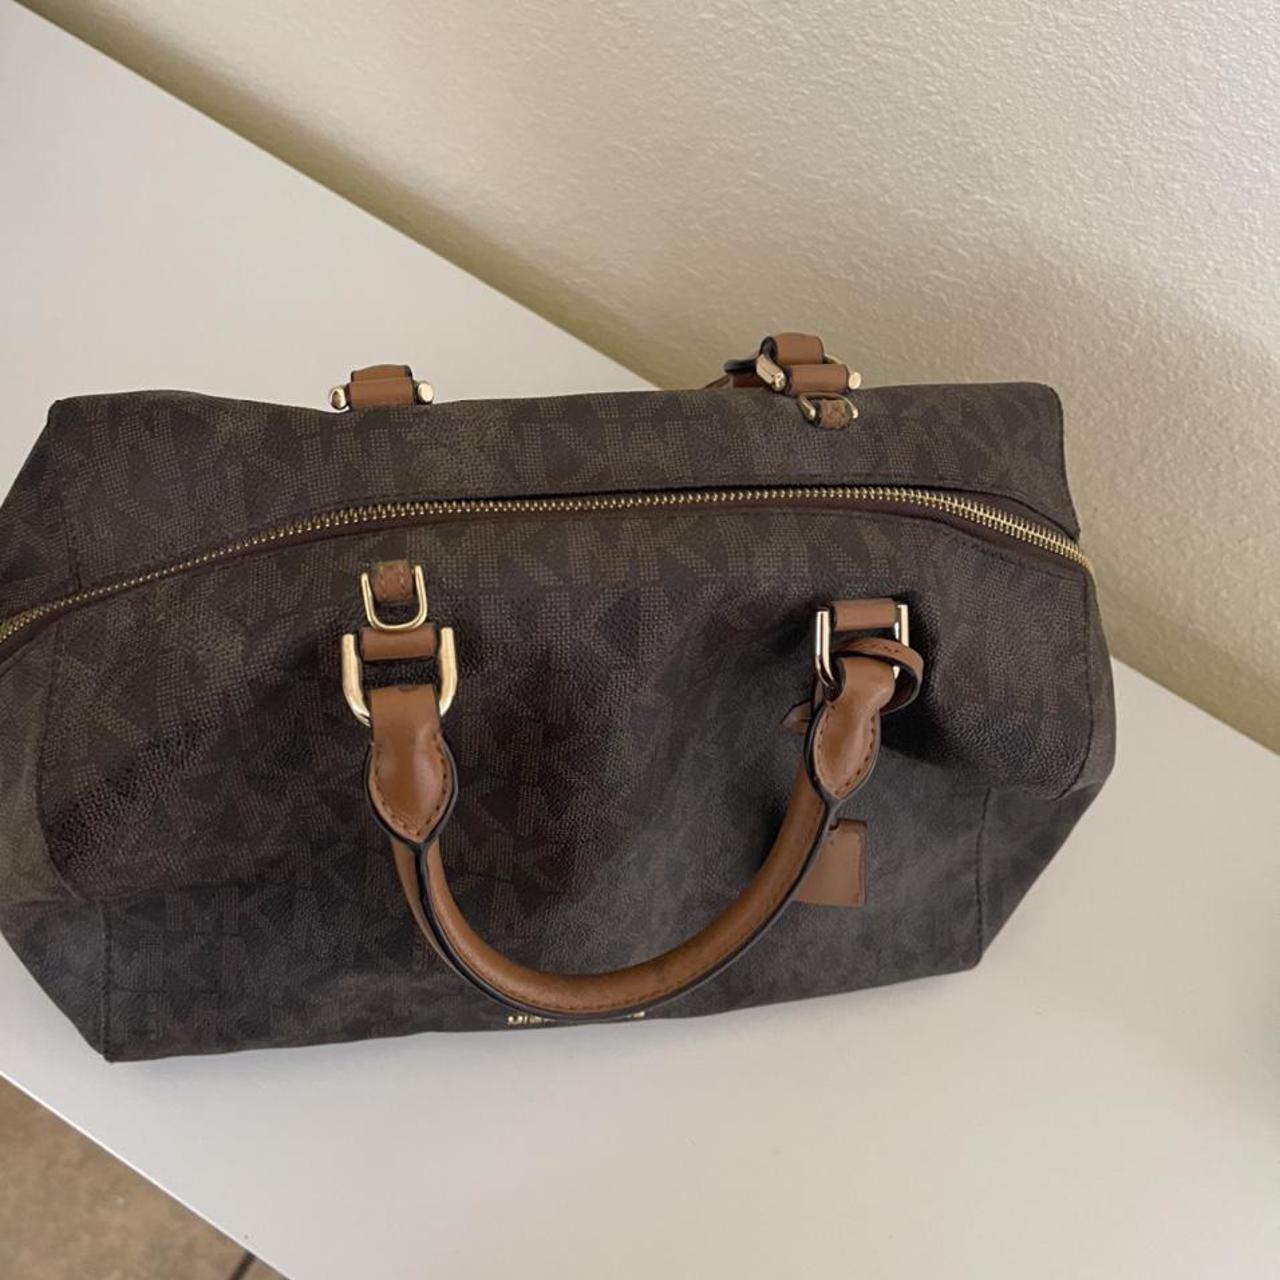 Find more Authentic Brown Michael Kors Speedy Bag for sale at up